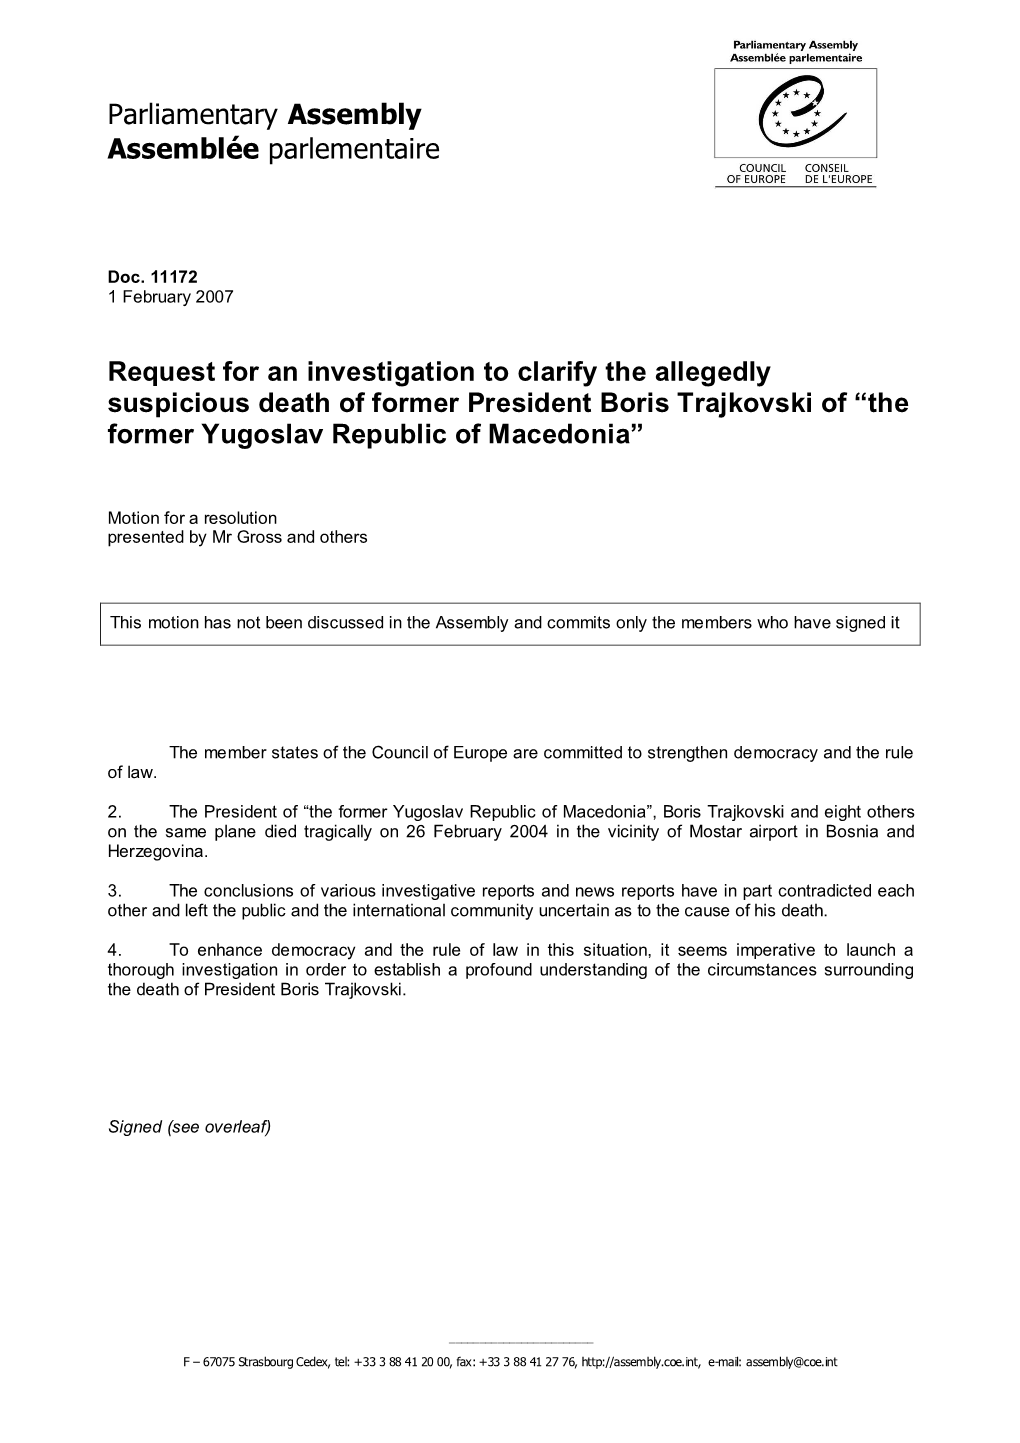 Request for an Investigation to Clarify the Allegedly Suspicious Death of Former President Boris Trajkovski of “The Former Yugoslav Republic of Macedonia”